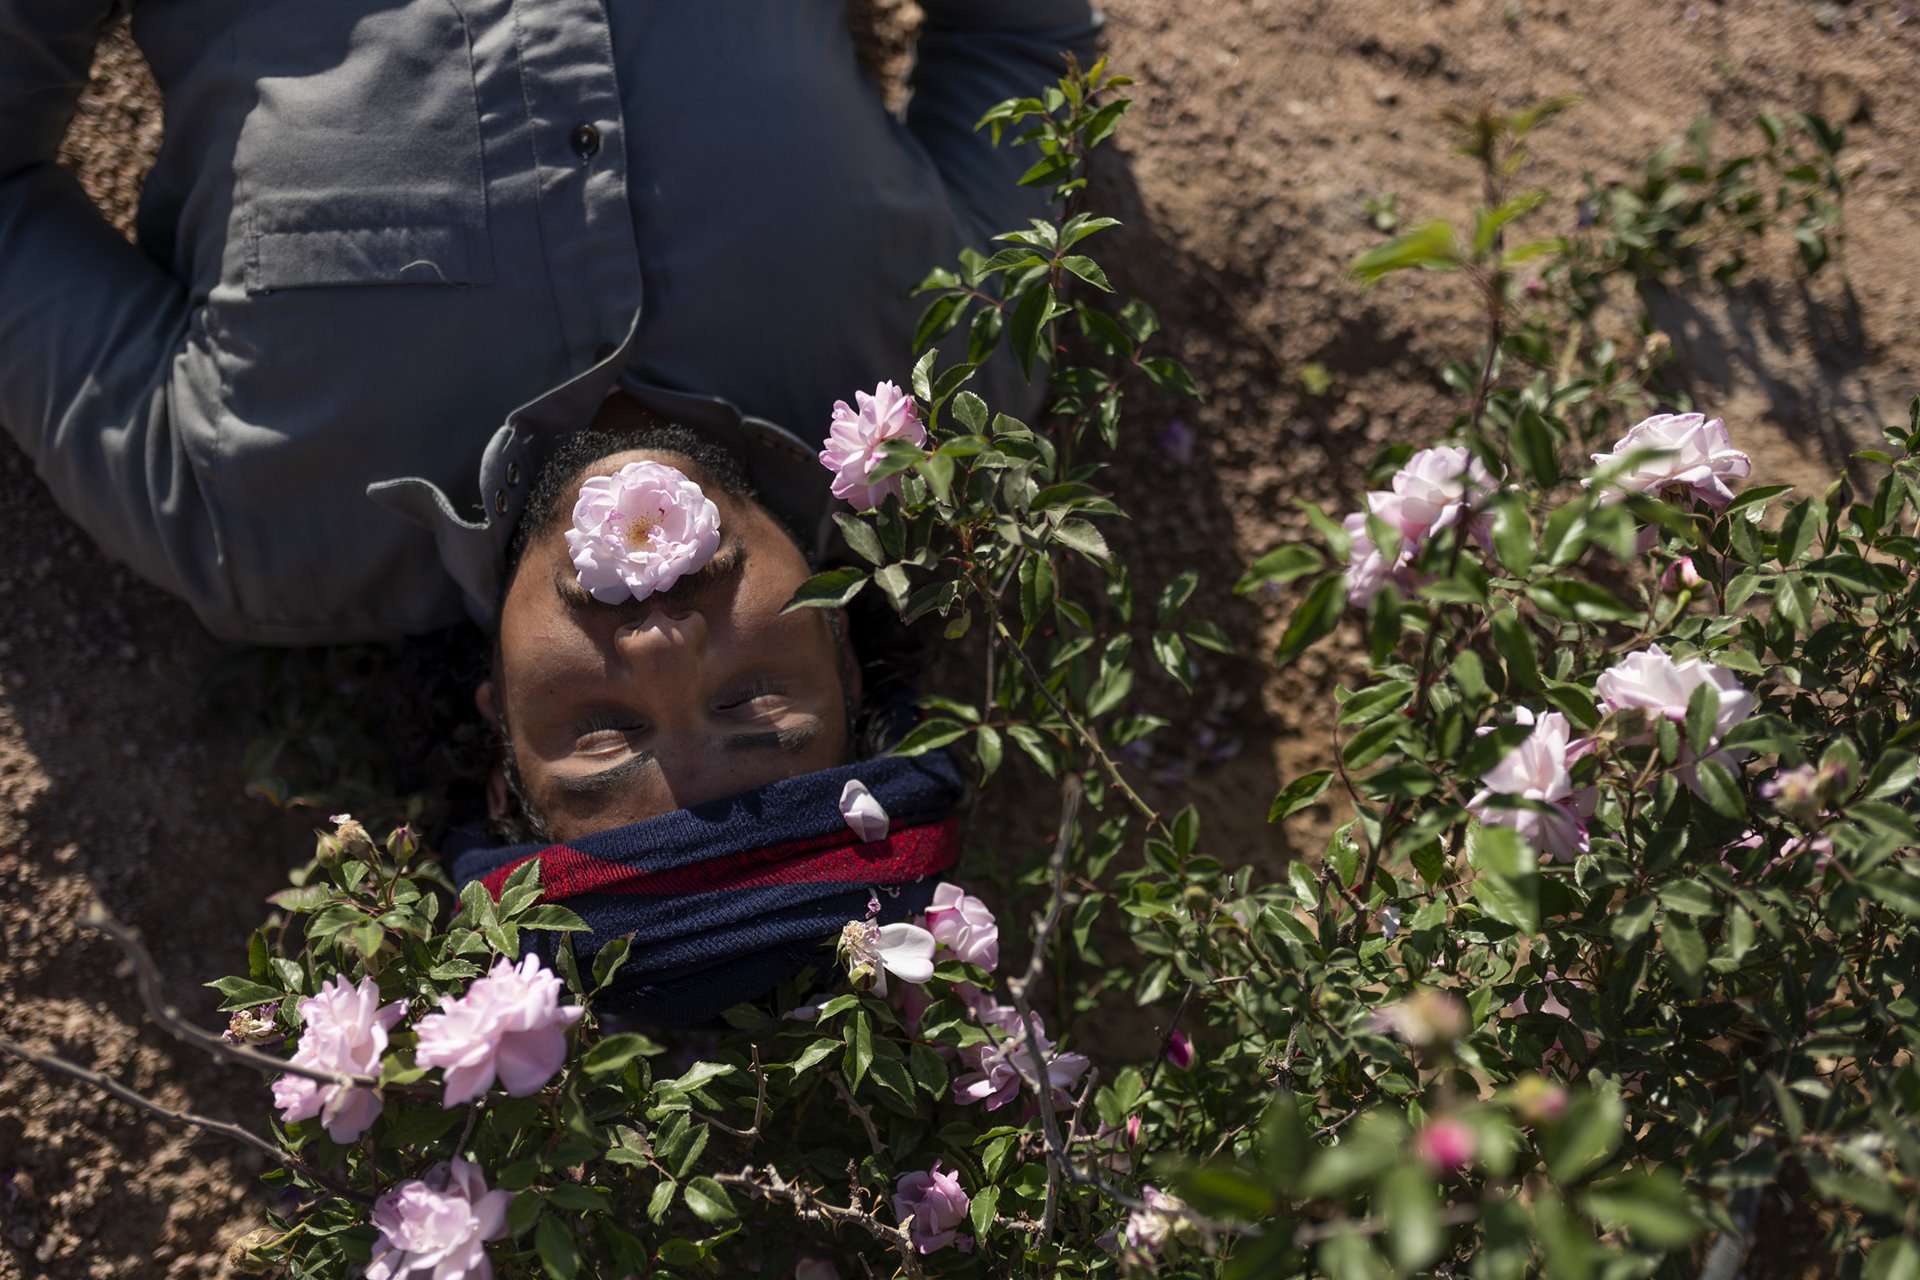 Moussa Algebaly (25) lies under the tea flower plant (<em>Rosa gallica</em>) after performing daily maintenance in his garden in Al-Tarfa village, South Sinai, Egypt. When boiled, the tea flower plant helps reduce menstrual and labor pain for Bedouin women, who struggle to access medical care. After years of drought, a major flood occurred in March 2020. This provided an agricultural opportunity for the Bedouin community, whose main source of income is tourism, amid the economic impact caused by the COVID-19 pandemic.